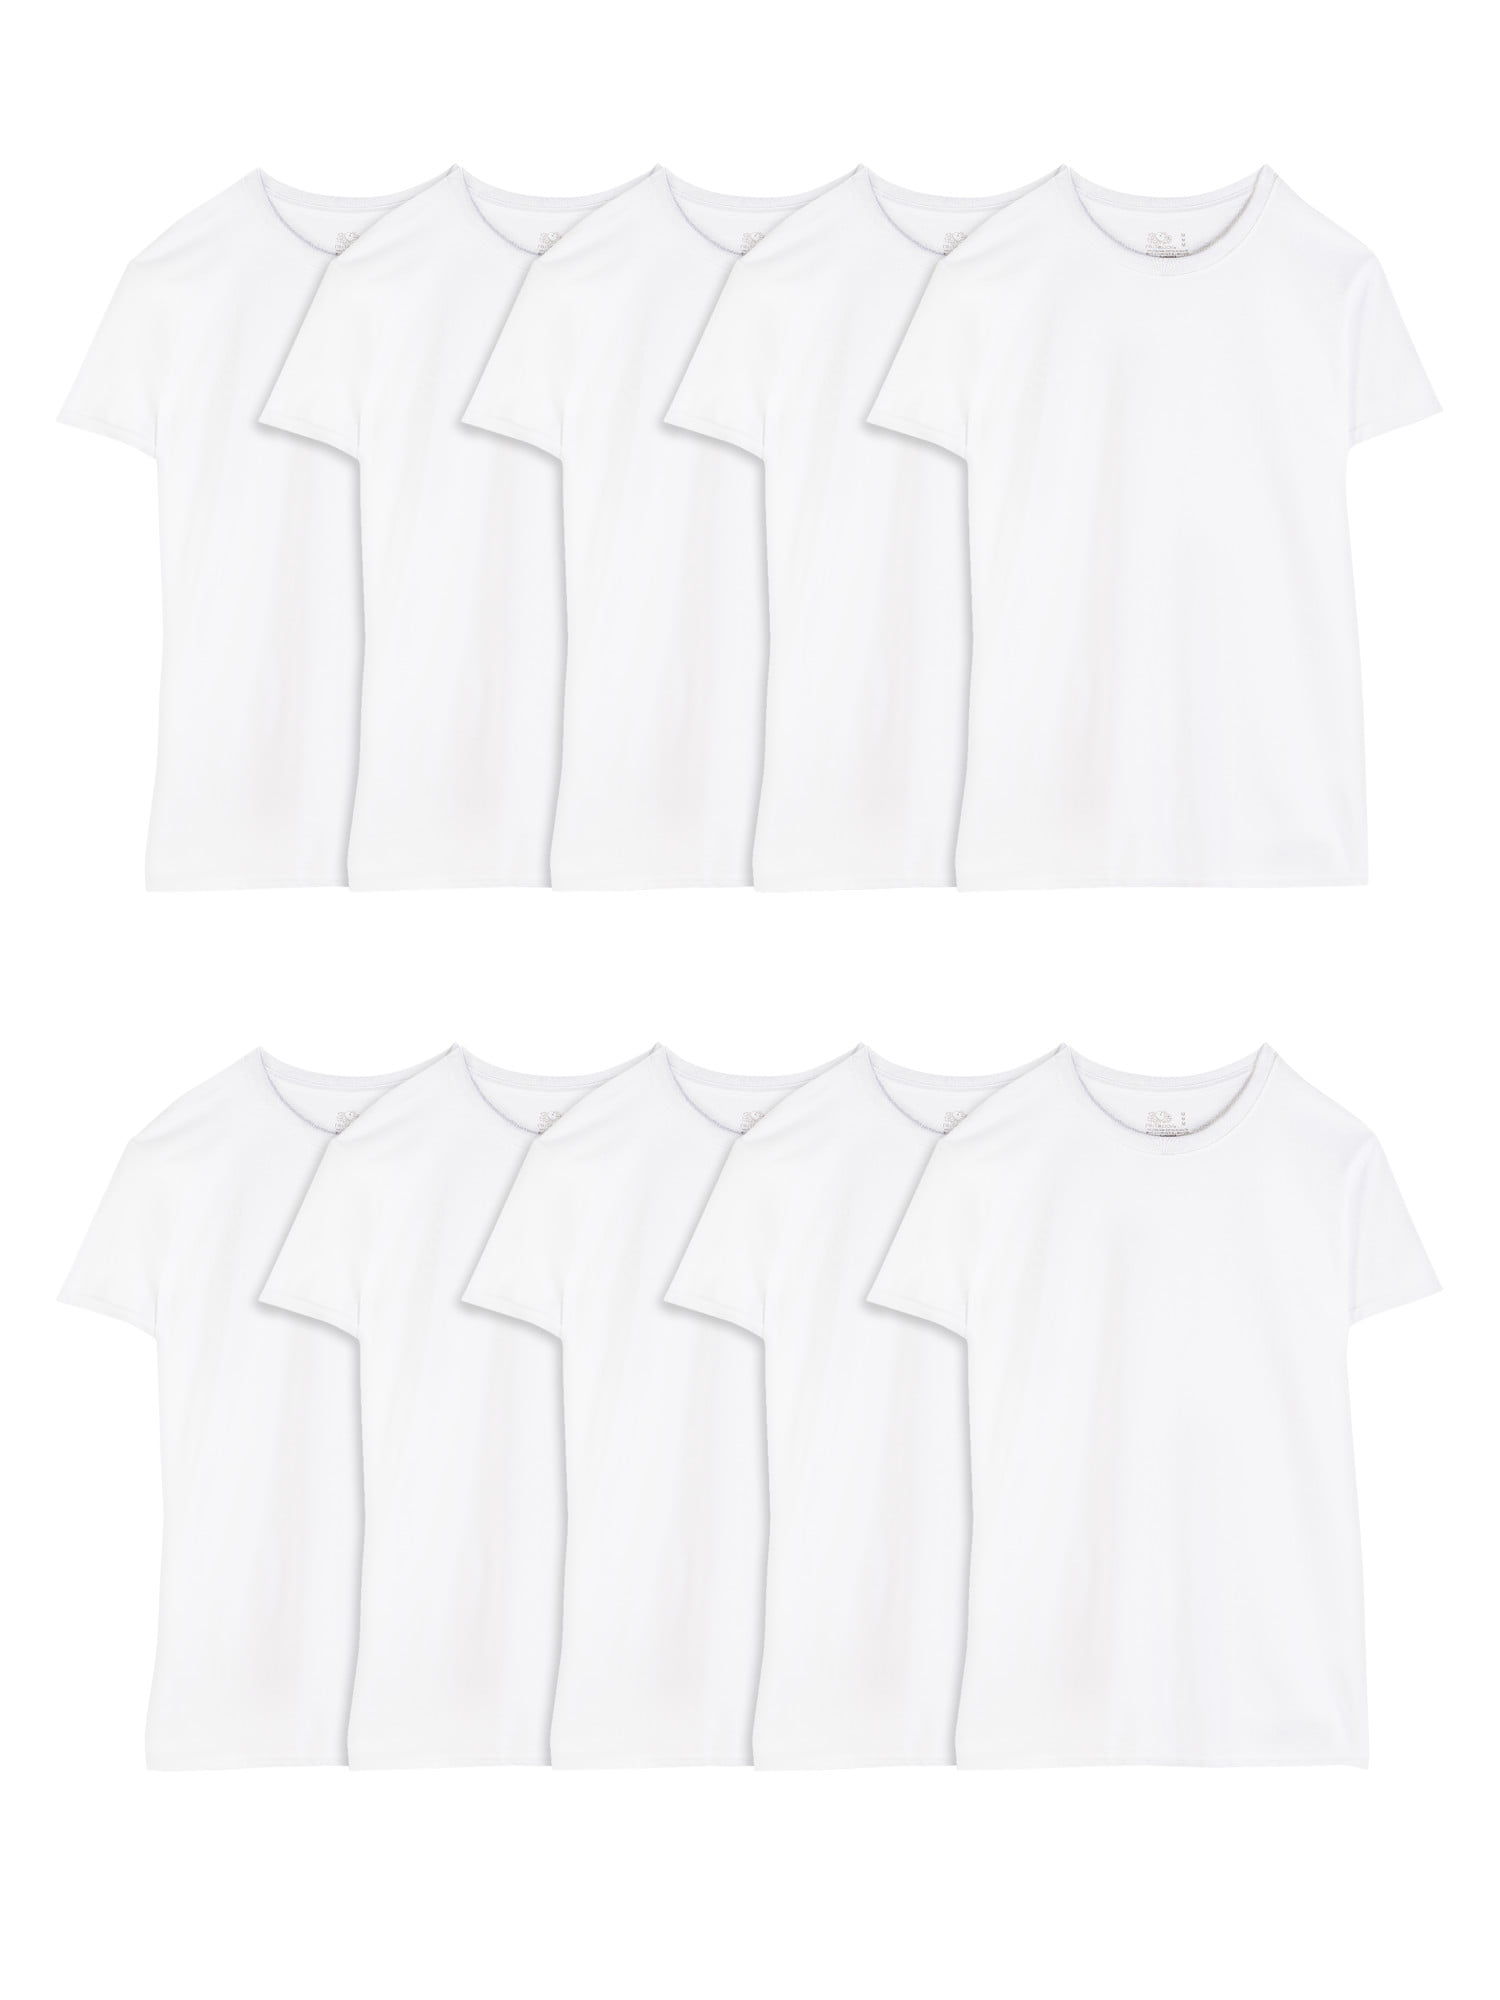 10-Pack Fruit of the Loom Men's Undershirts (White): Crew T-Shirt or Tank A-Shirts $18.98 + Free S&H w/ Walmart+ or $35+